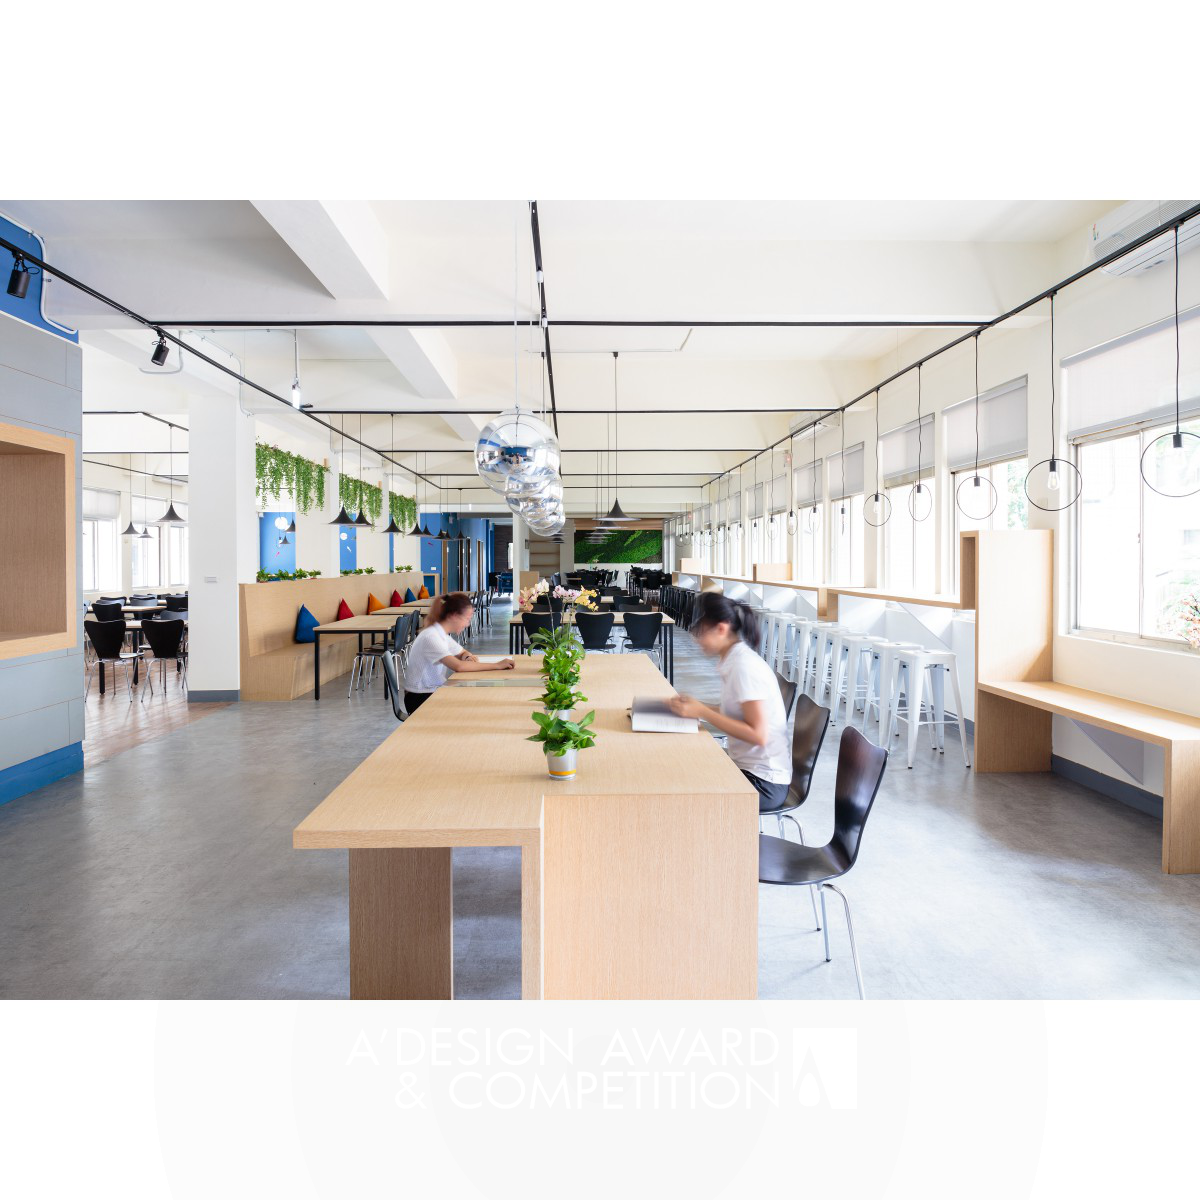 The New Moment Cafeteria by Minnie Jan and Daisuke Nagatomo Iron Interior Space and Exhibition Design Award Winner 2019 